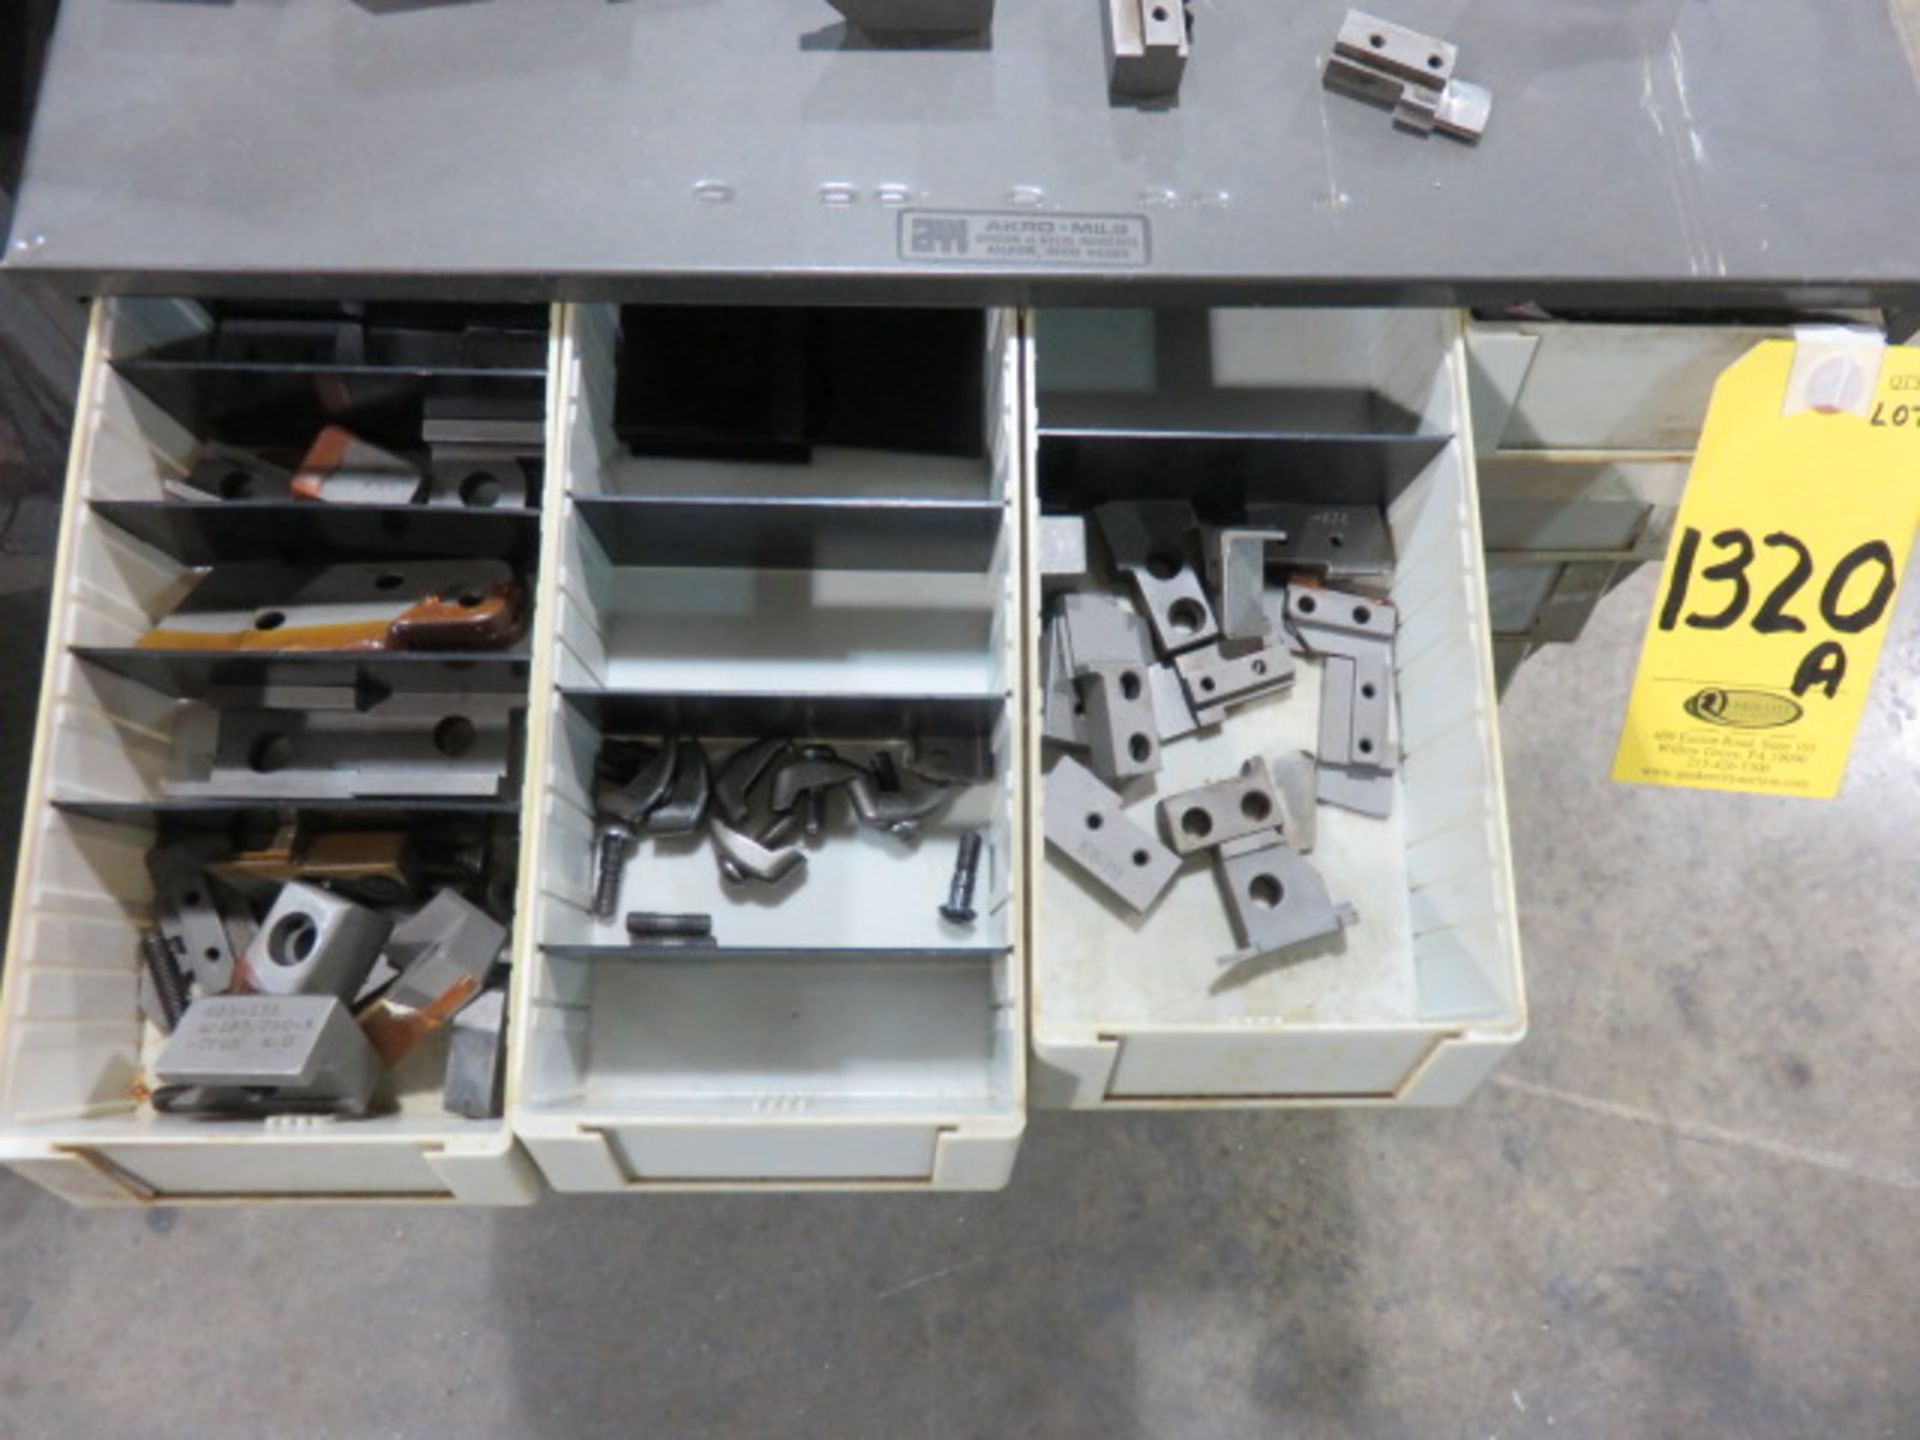 CUT-OFF BLADES FOR LATHE TOOLS W/ CABINET-FITS IN LOTS 1313,1314,1320 - Image 2 of 5